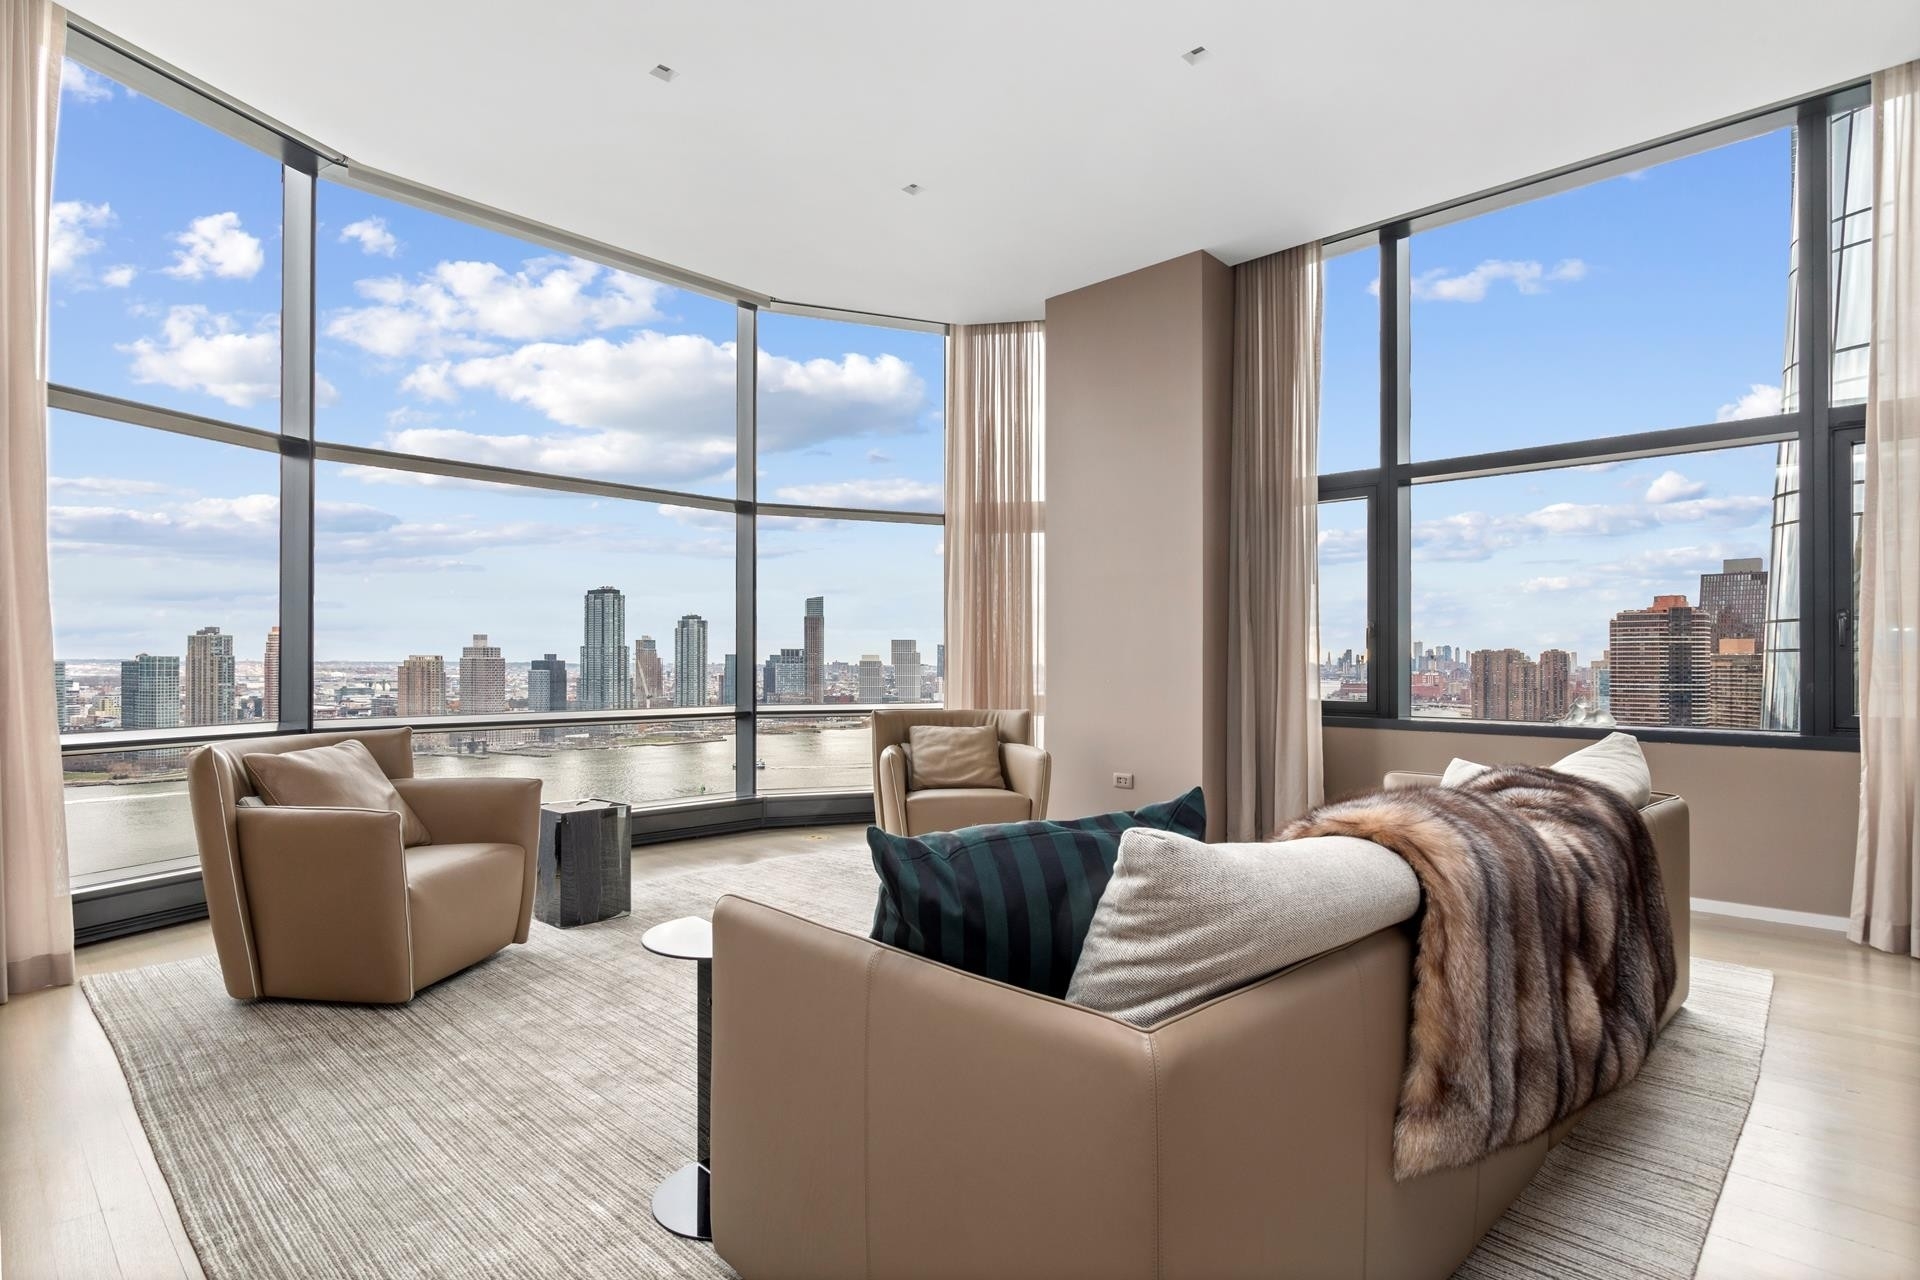 1. Condominiums for Sale at 50 UNITED NATIONS PLZ, 27A Turtle Bay, New York, NY 10017